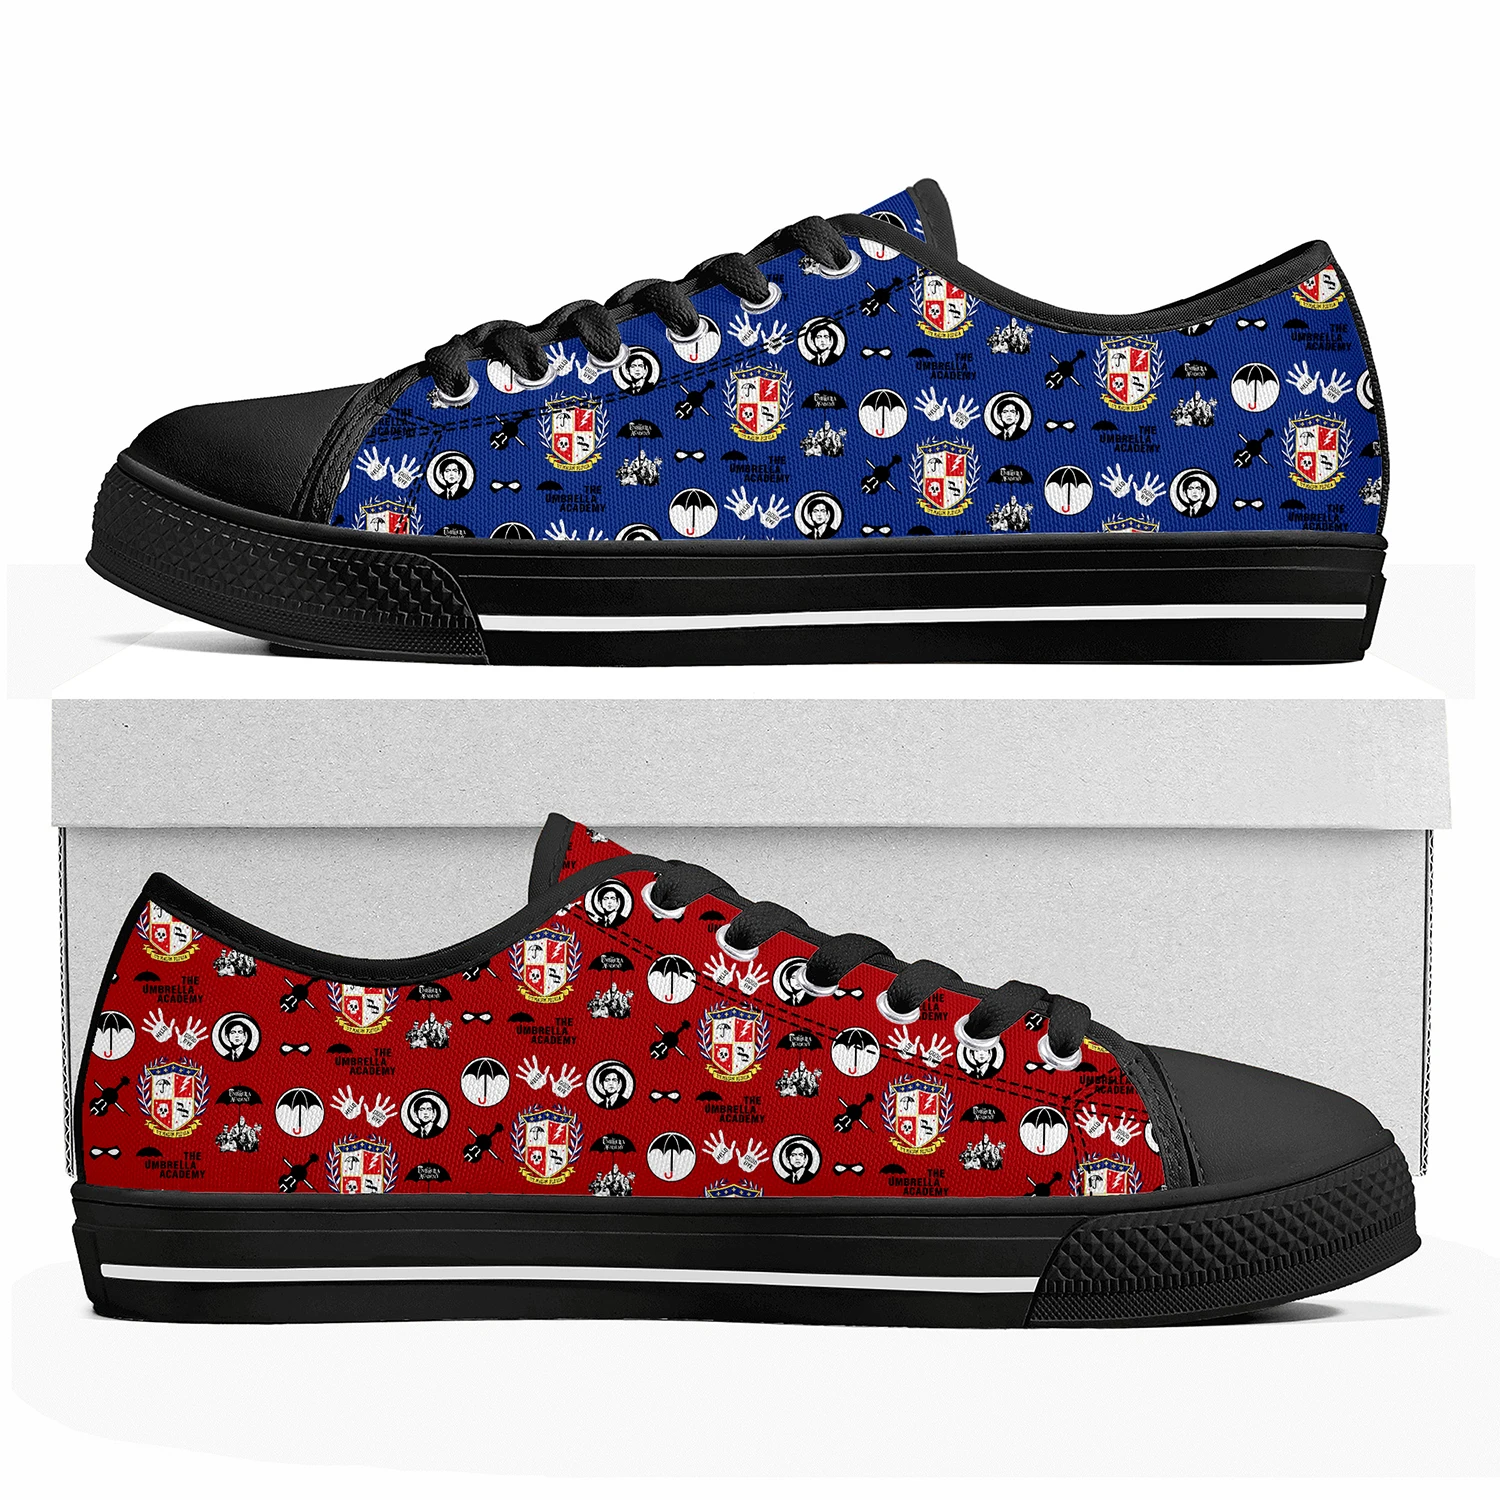 

The Umbrella Academy Low Top Sneakers Womens Mens Teenager High Quality Canvas Sneaker Casual Anime Cartoon Customize Shoes